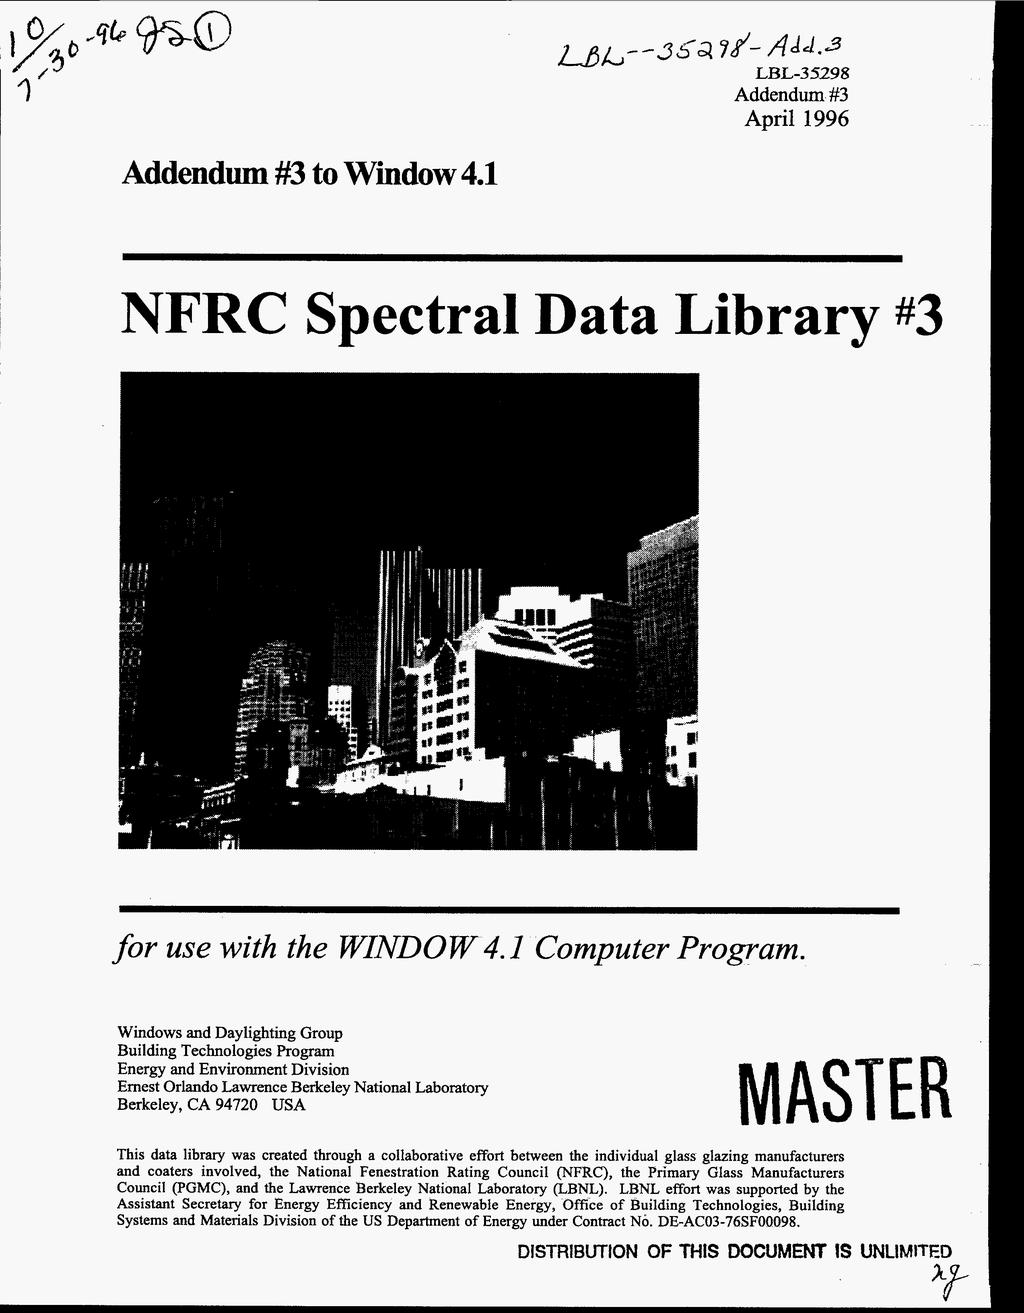 Addendum #3 April 1996 Addendum #3 to Window 4.1 NFRC Spectral Data Library #3 for use with the WIND0W 4.1 Computer Program.